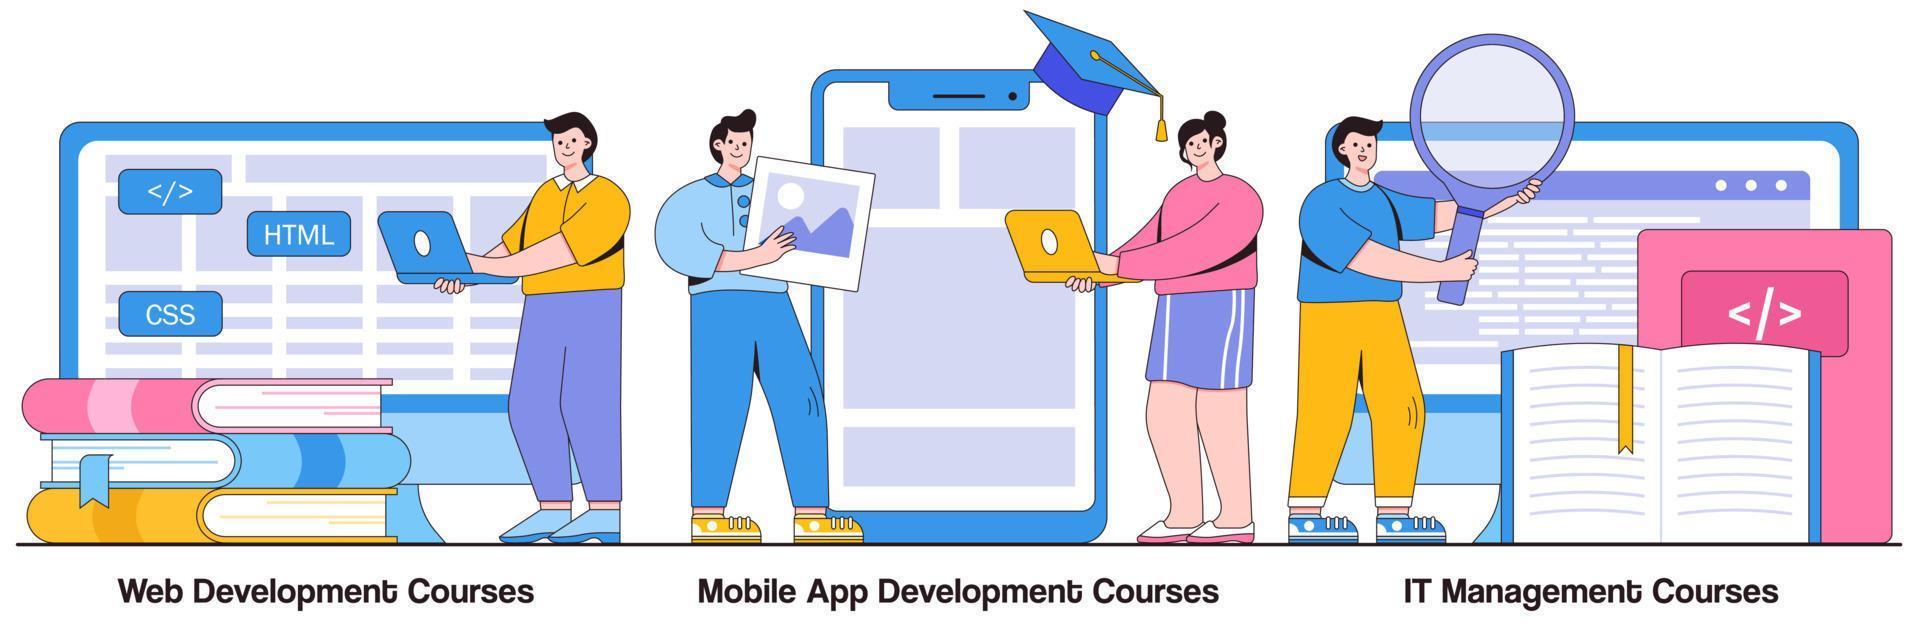 Web development courses, mobile app development and IT management classes concept with people character. Information technology career vector illustration set. Junior frontend, online coding metaphor